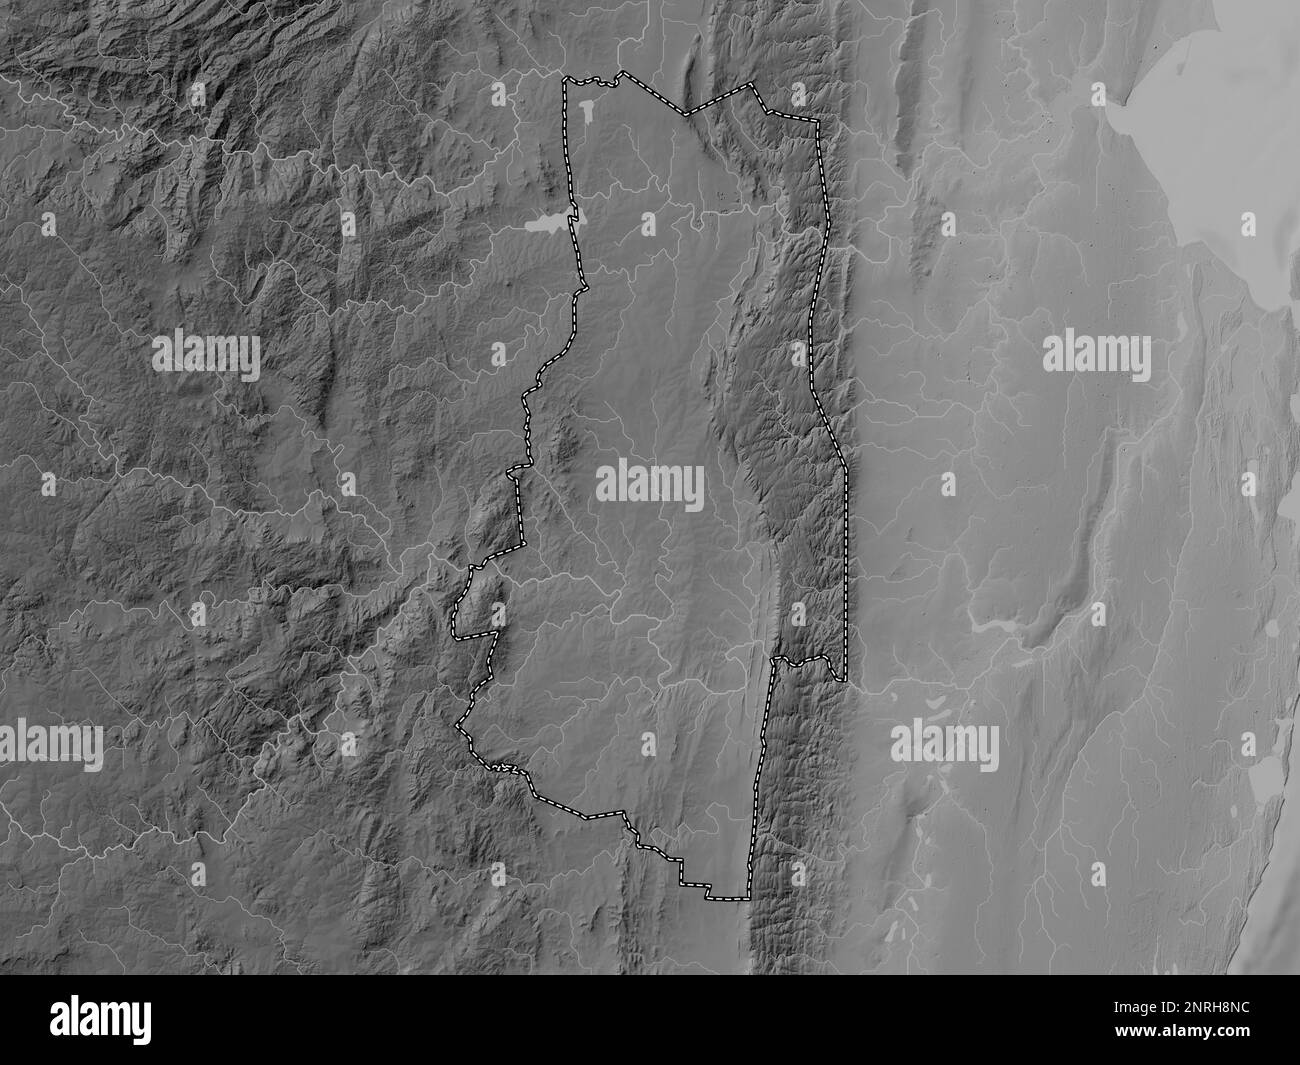 Lubombo, district of Eswatini. Grayscale elevation map with lakes and rivers Stock Photo